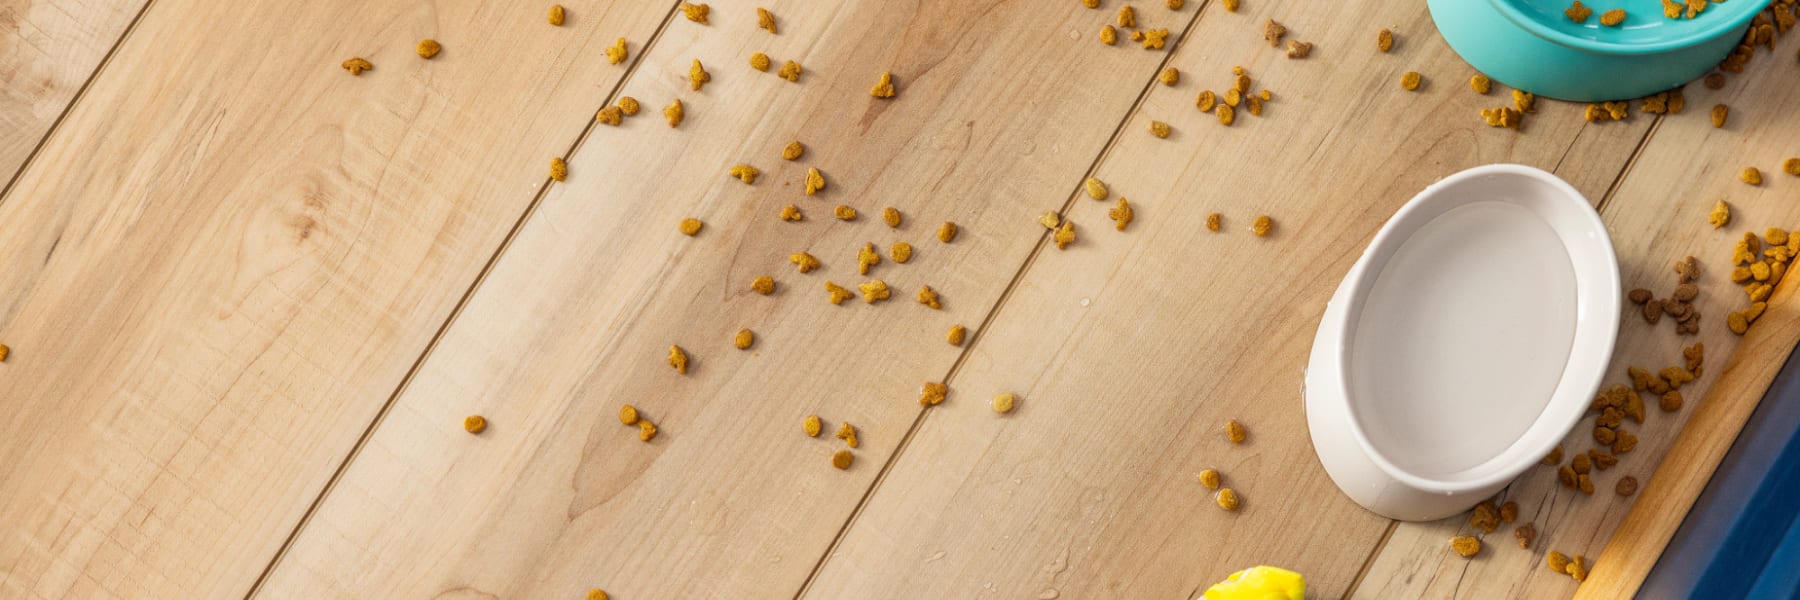 COREtec® wood look flooring with a spilt bowl of cat food and colorful cat toys shaped like sushi rolls available